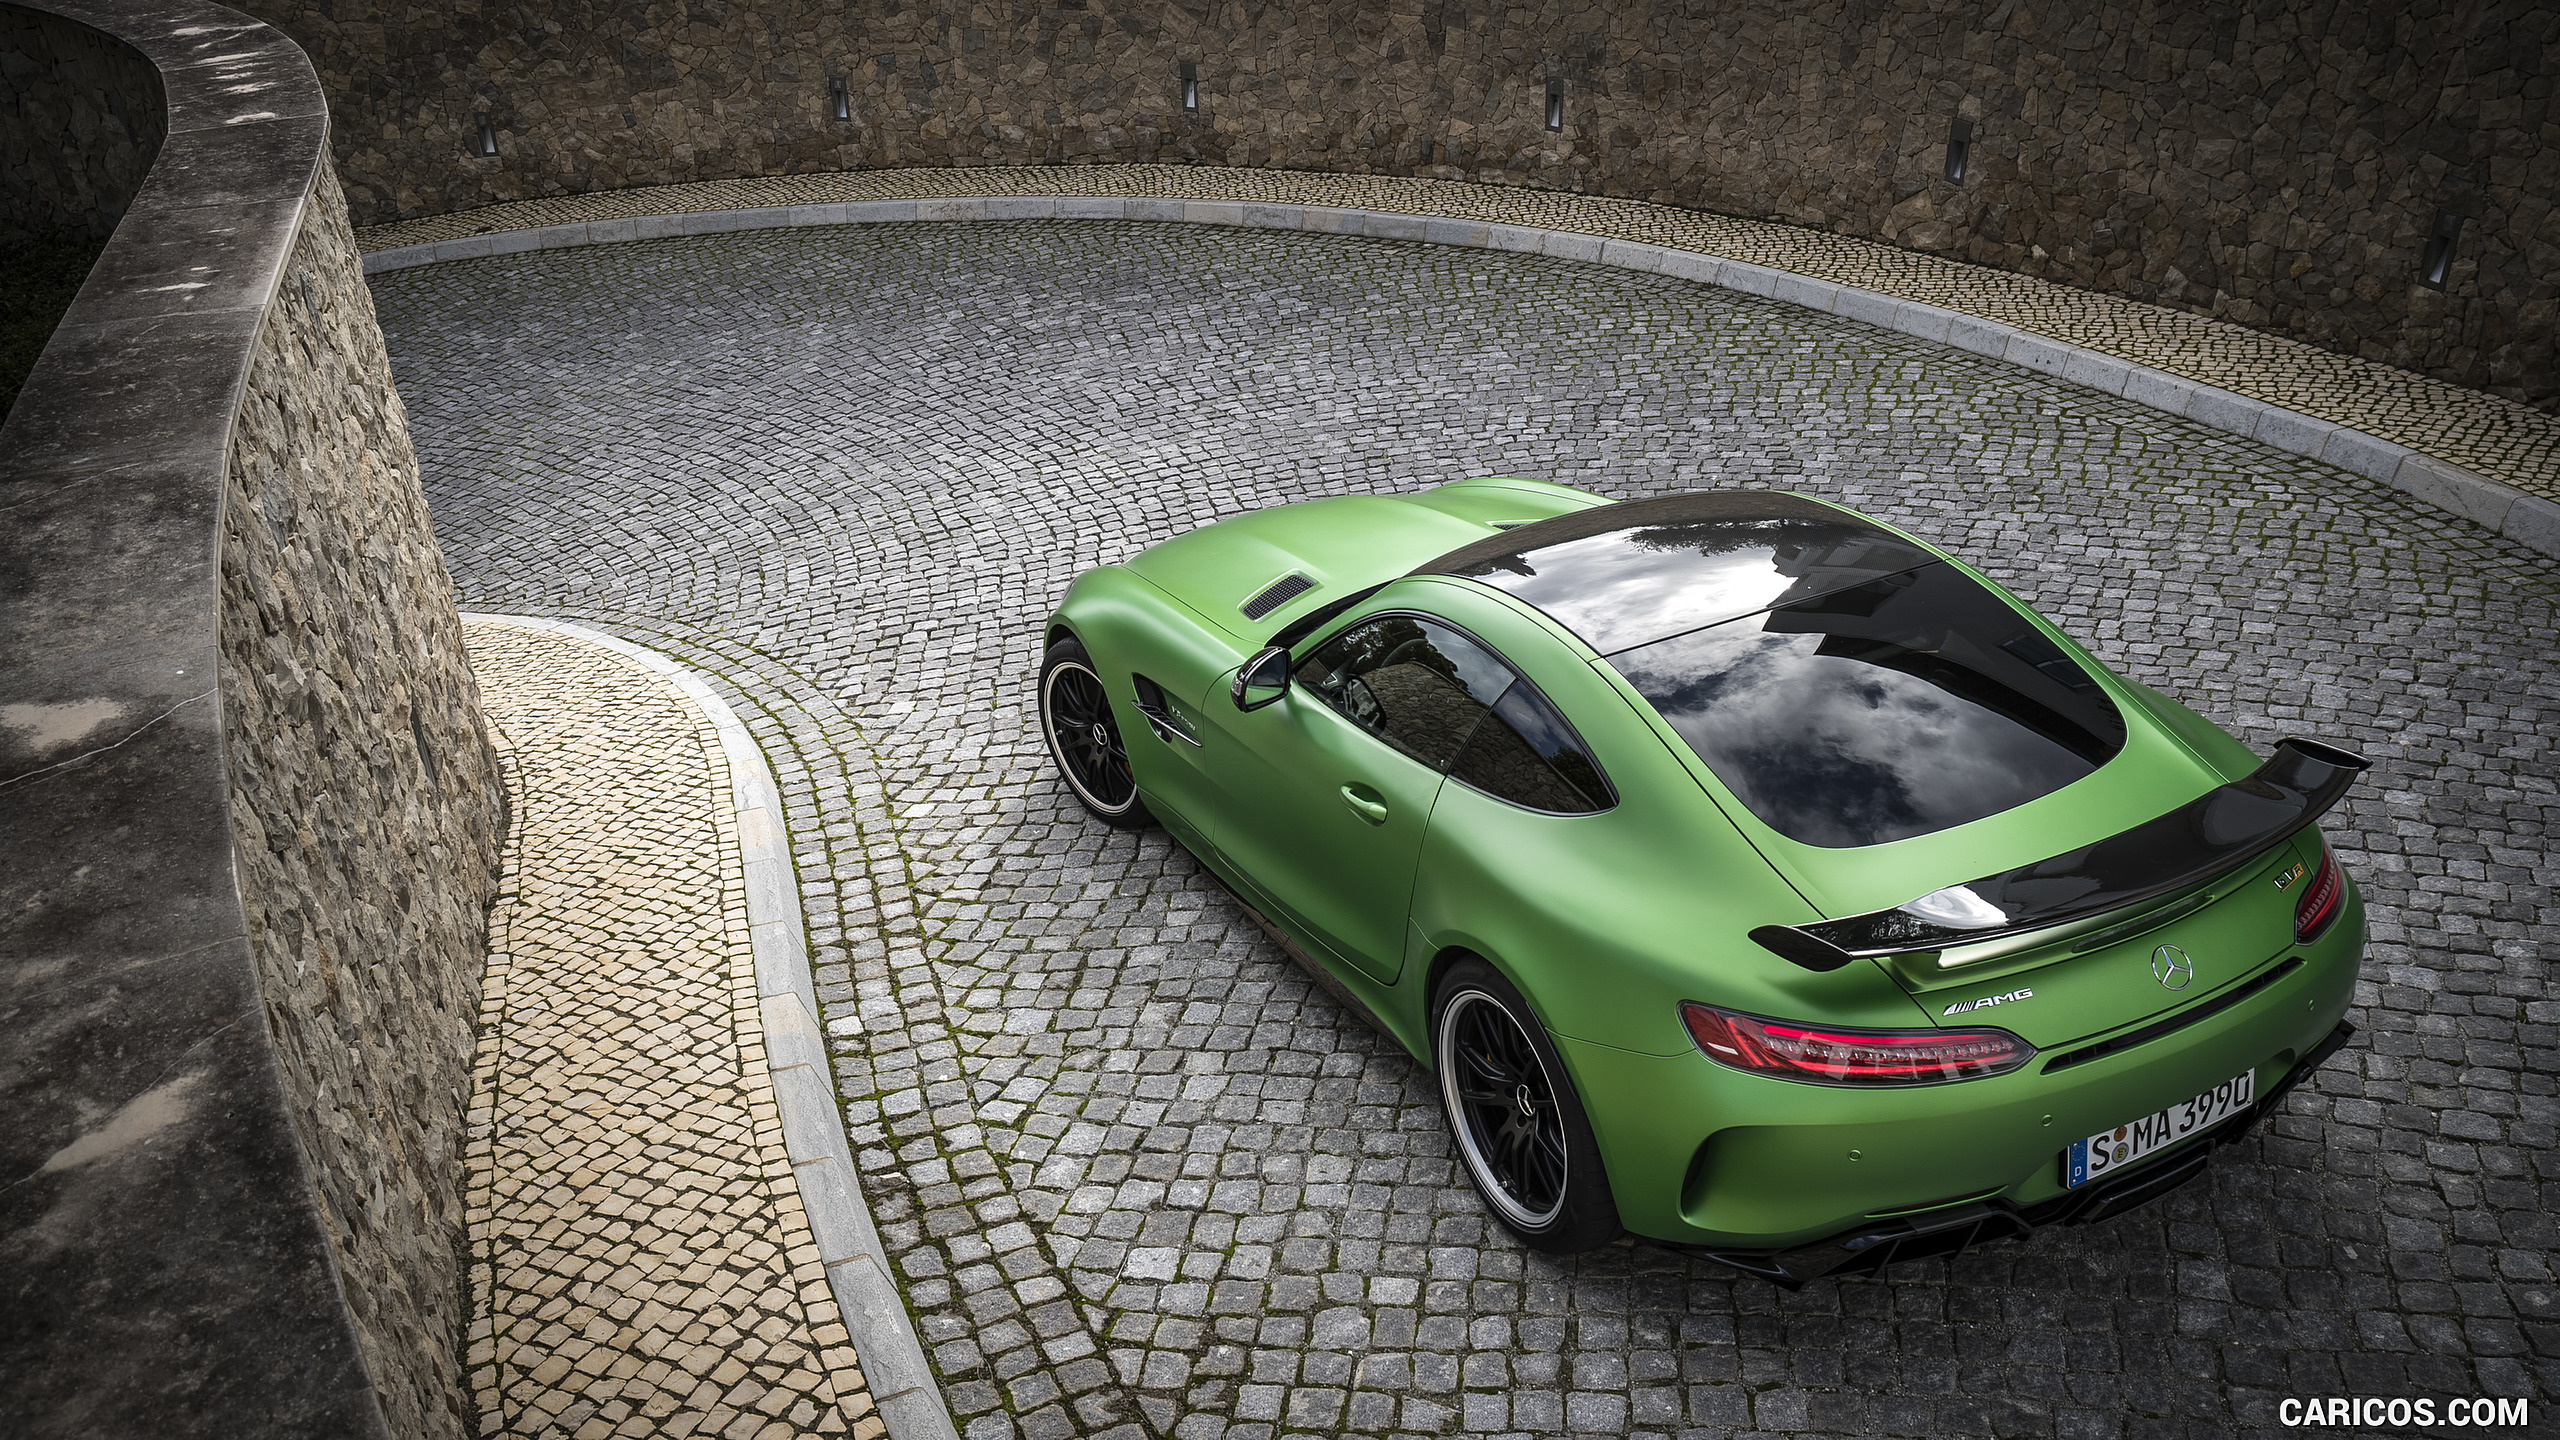 2017 Mercedes-AMG GT R - Top, #67 of 182